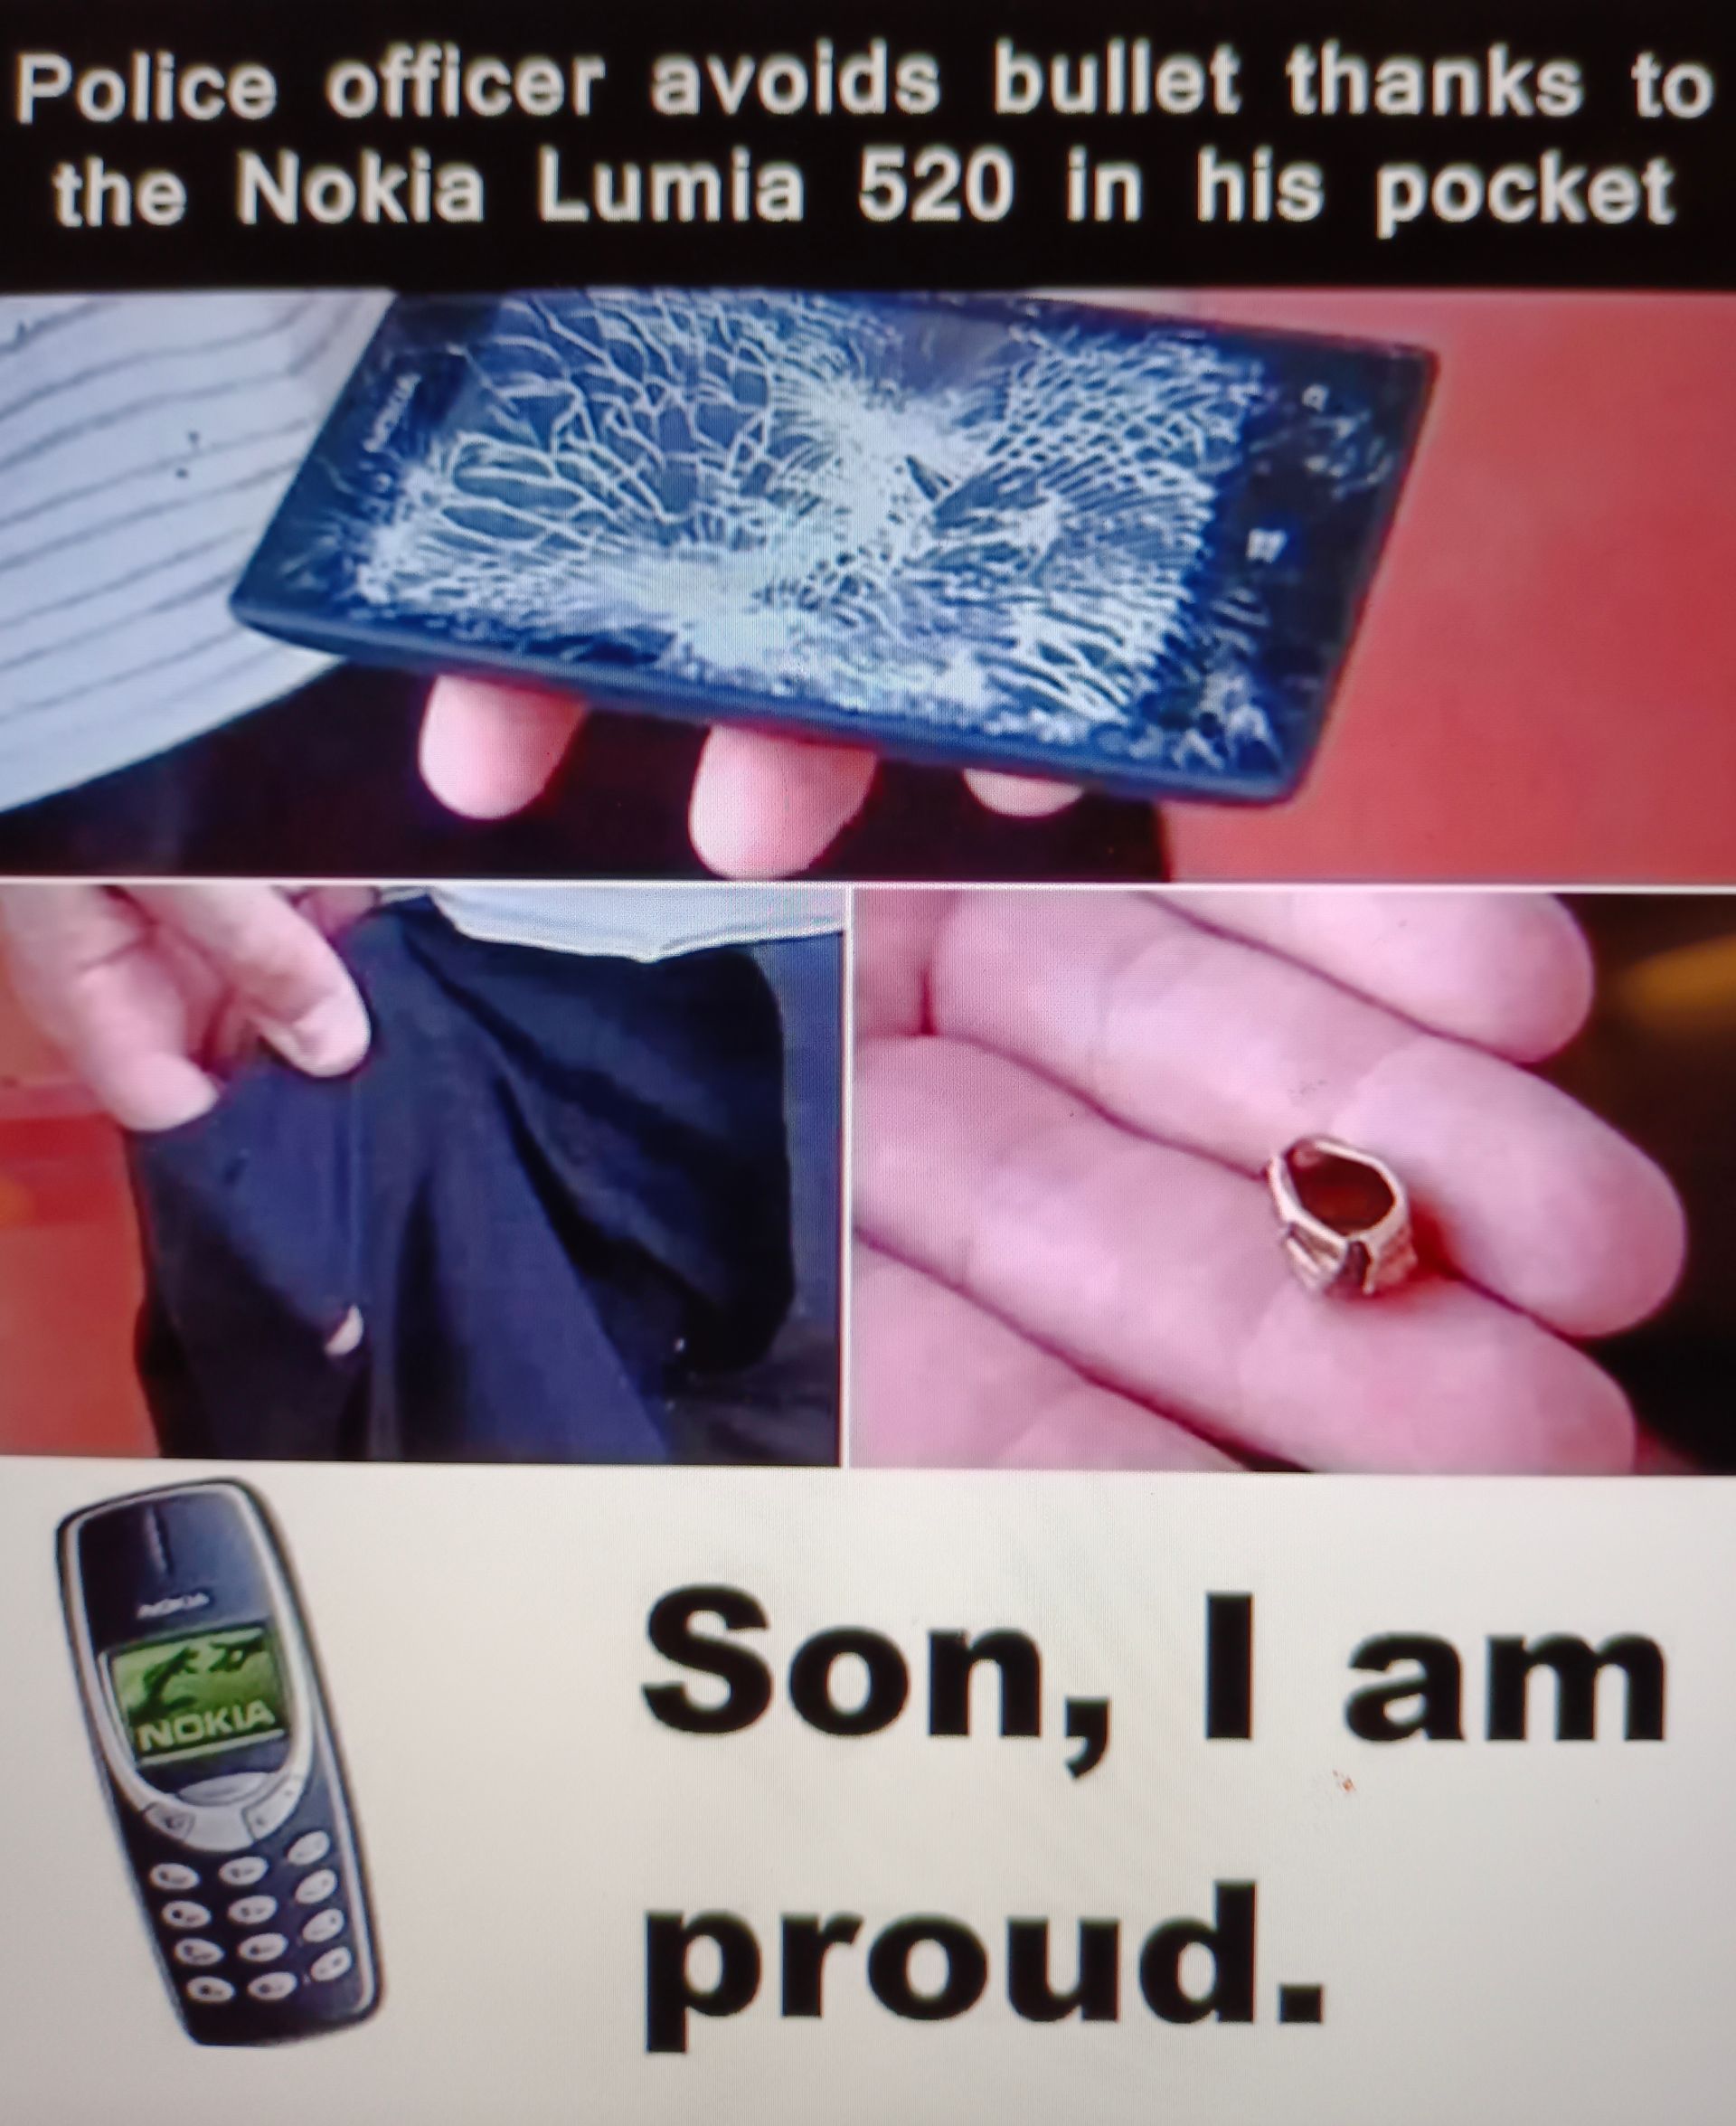 Police officer avoids bullet thanks to
the Nokia Lumia 520 in his pocket
NOKIA
77年
Son, I am
proud.